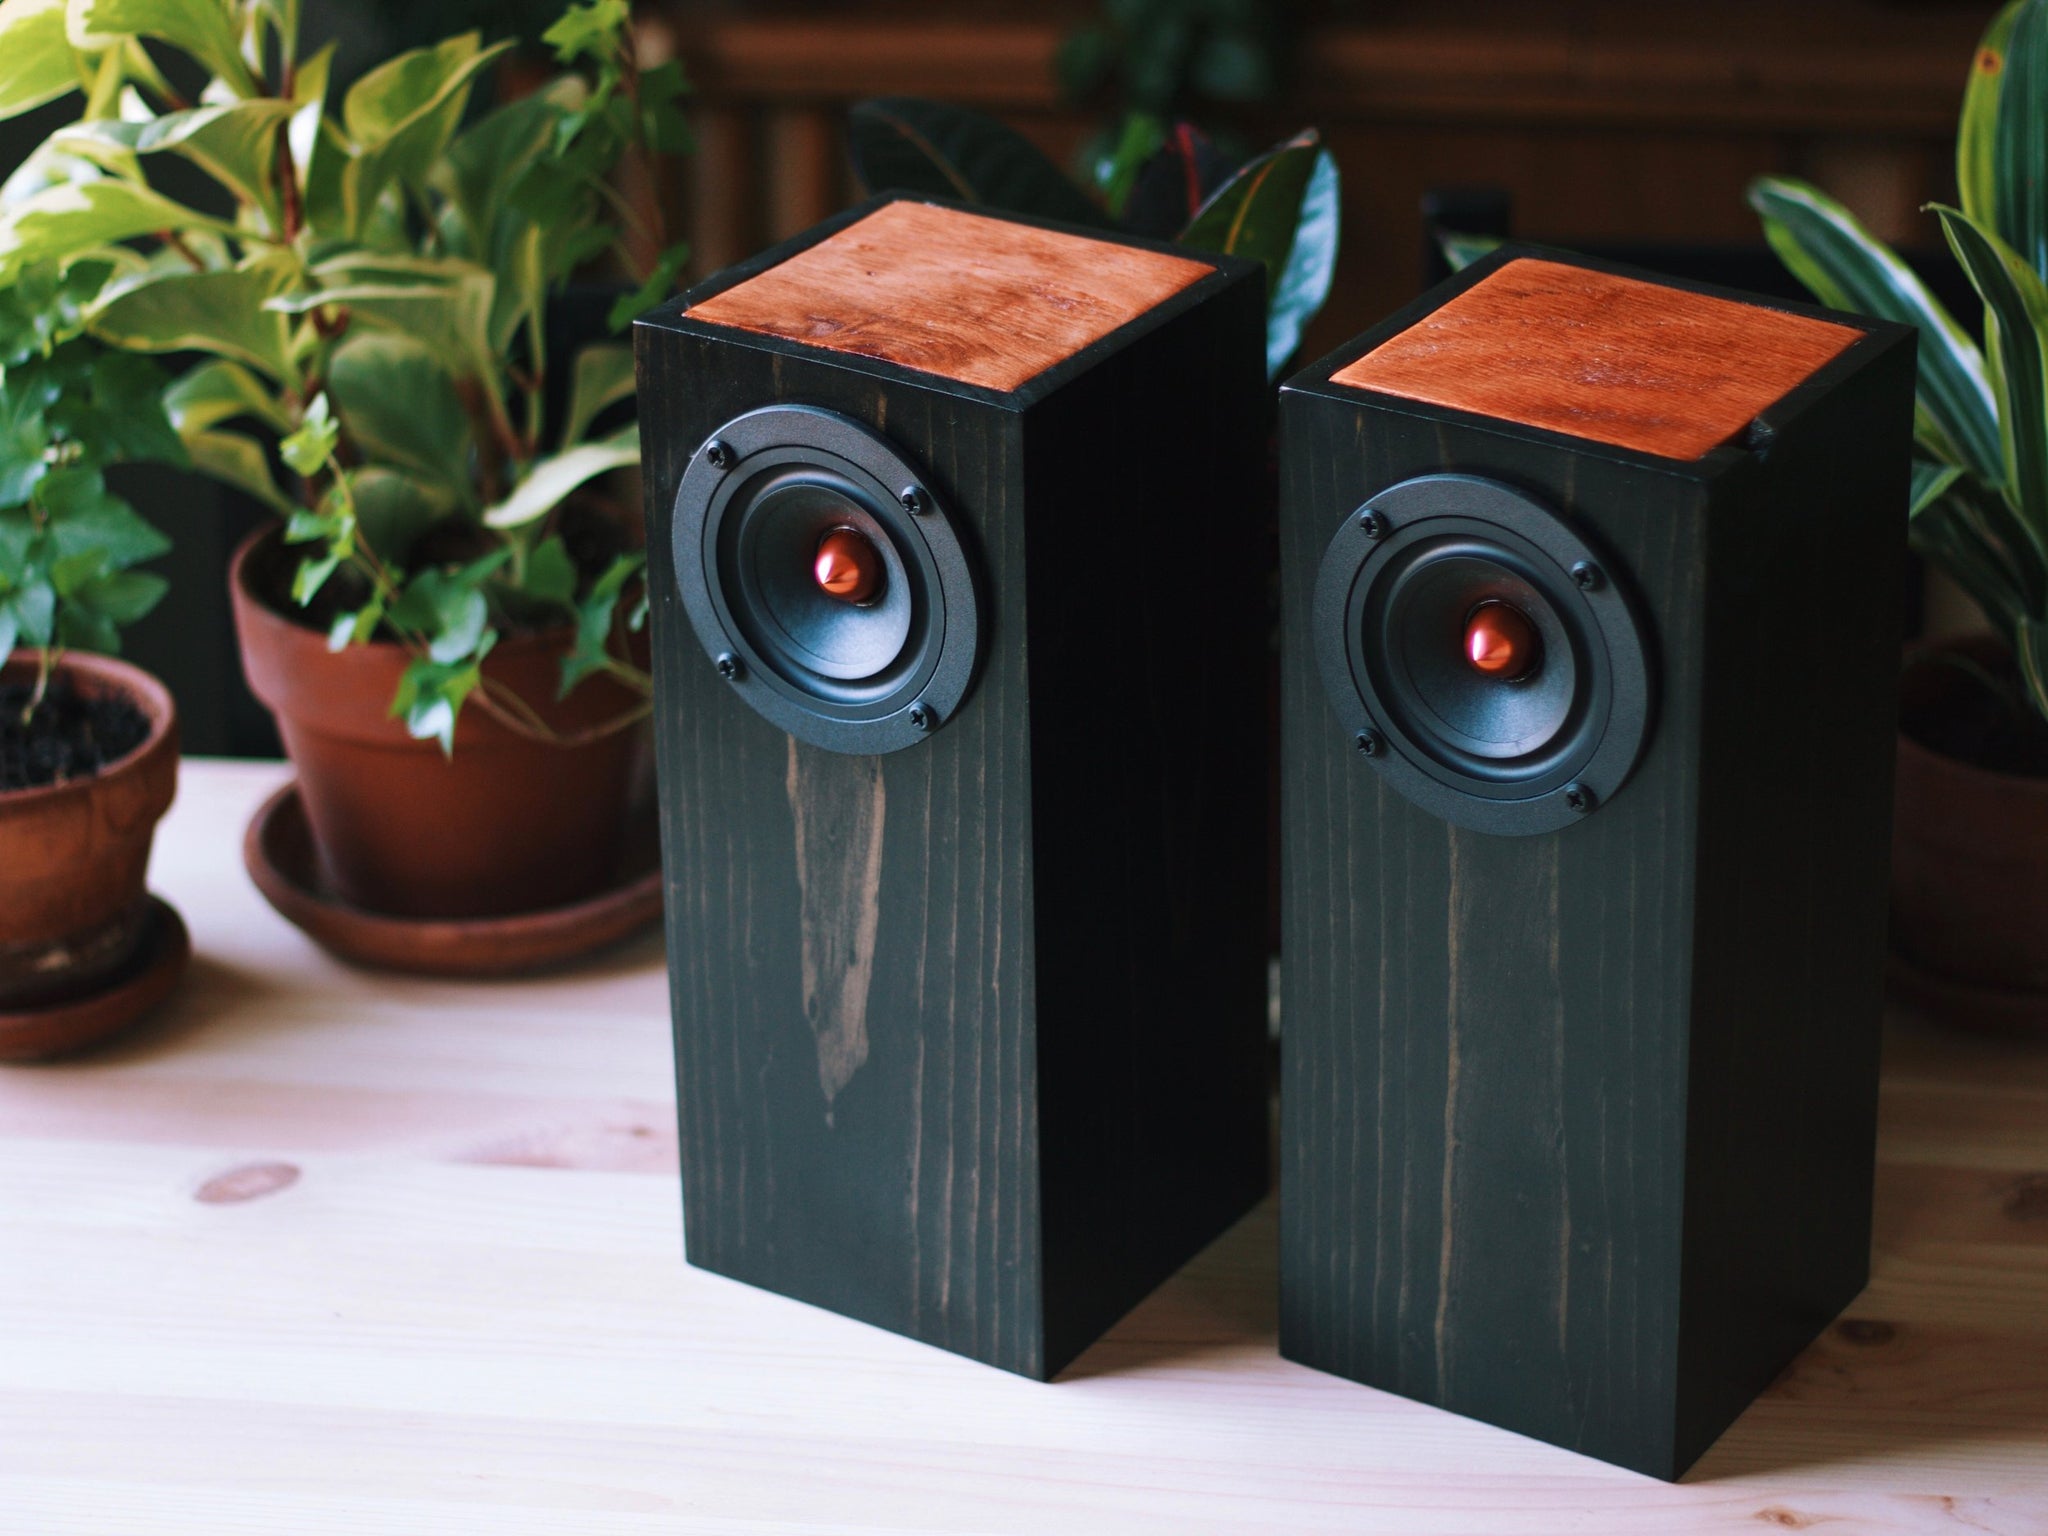 rockler amps up iphone music with new koostik kit - wooden